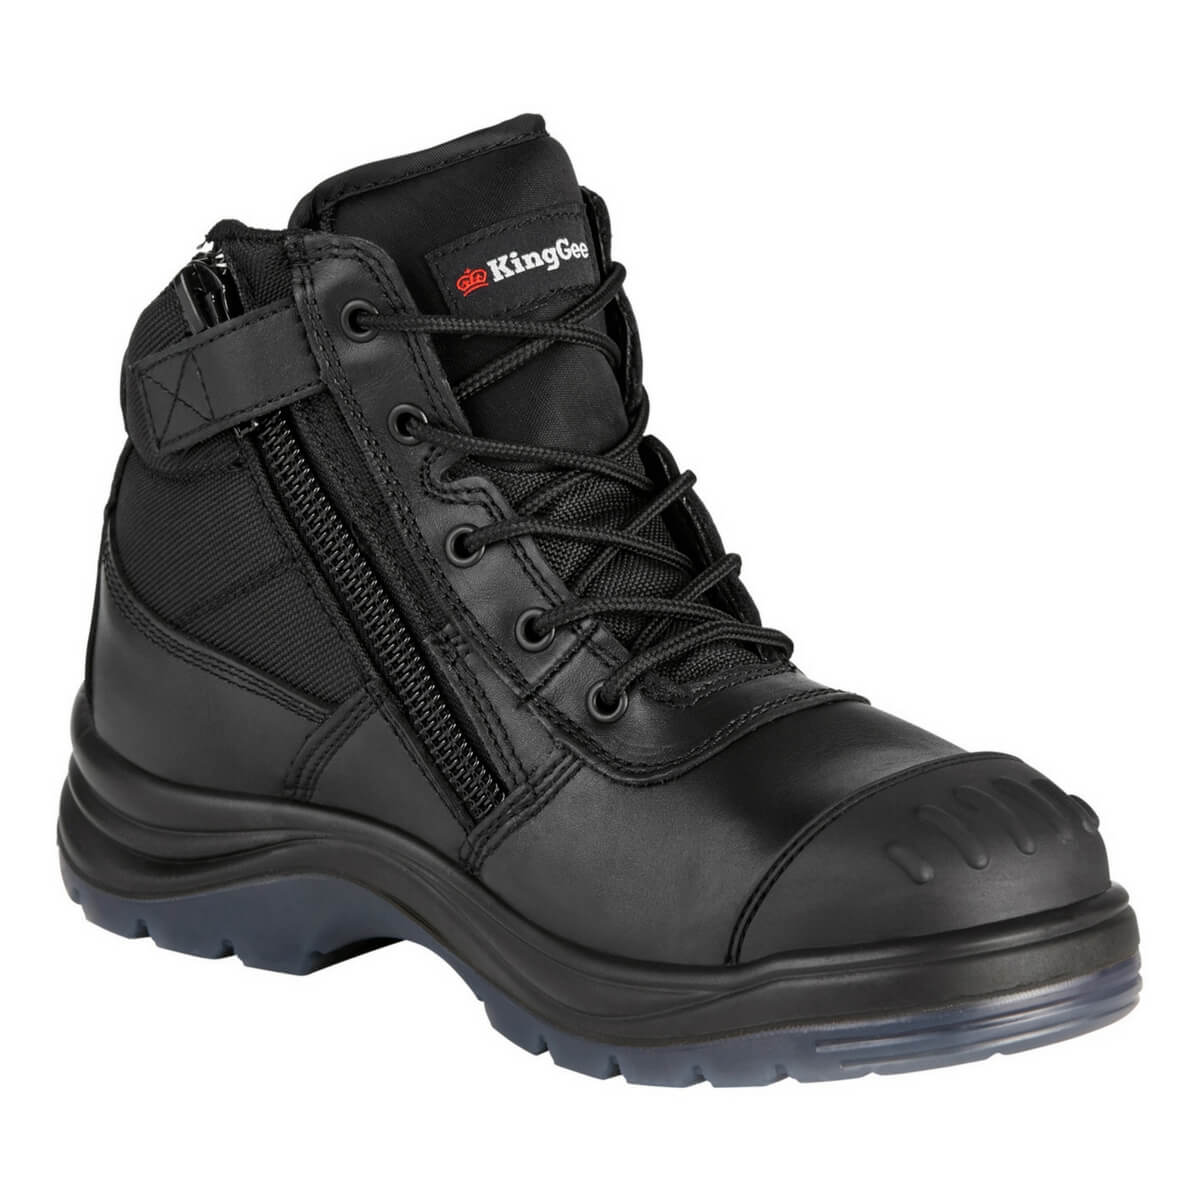 tradie brand work boots